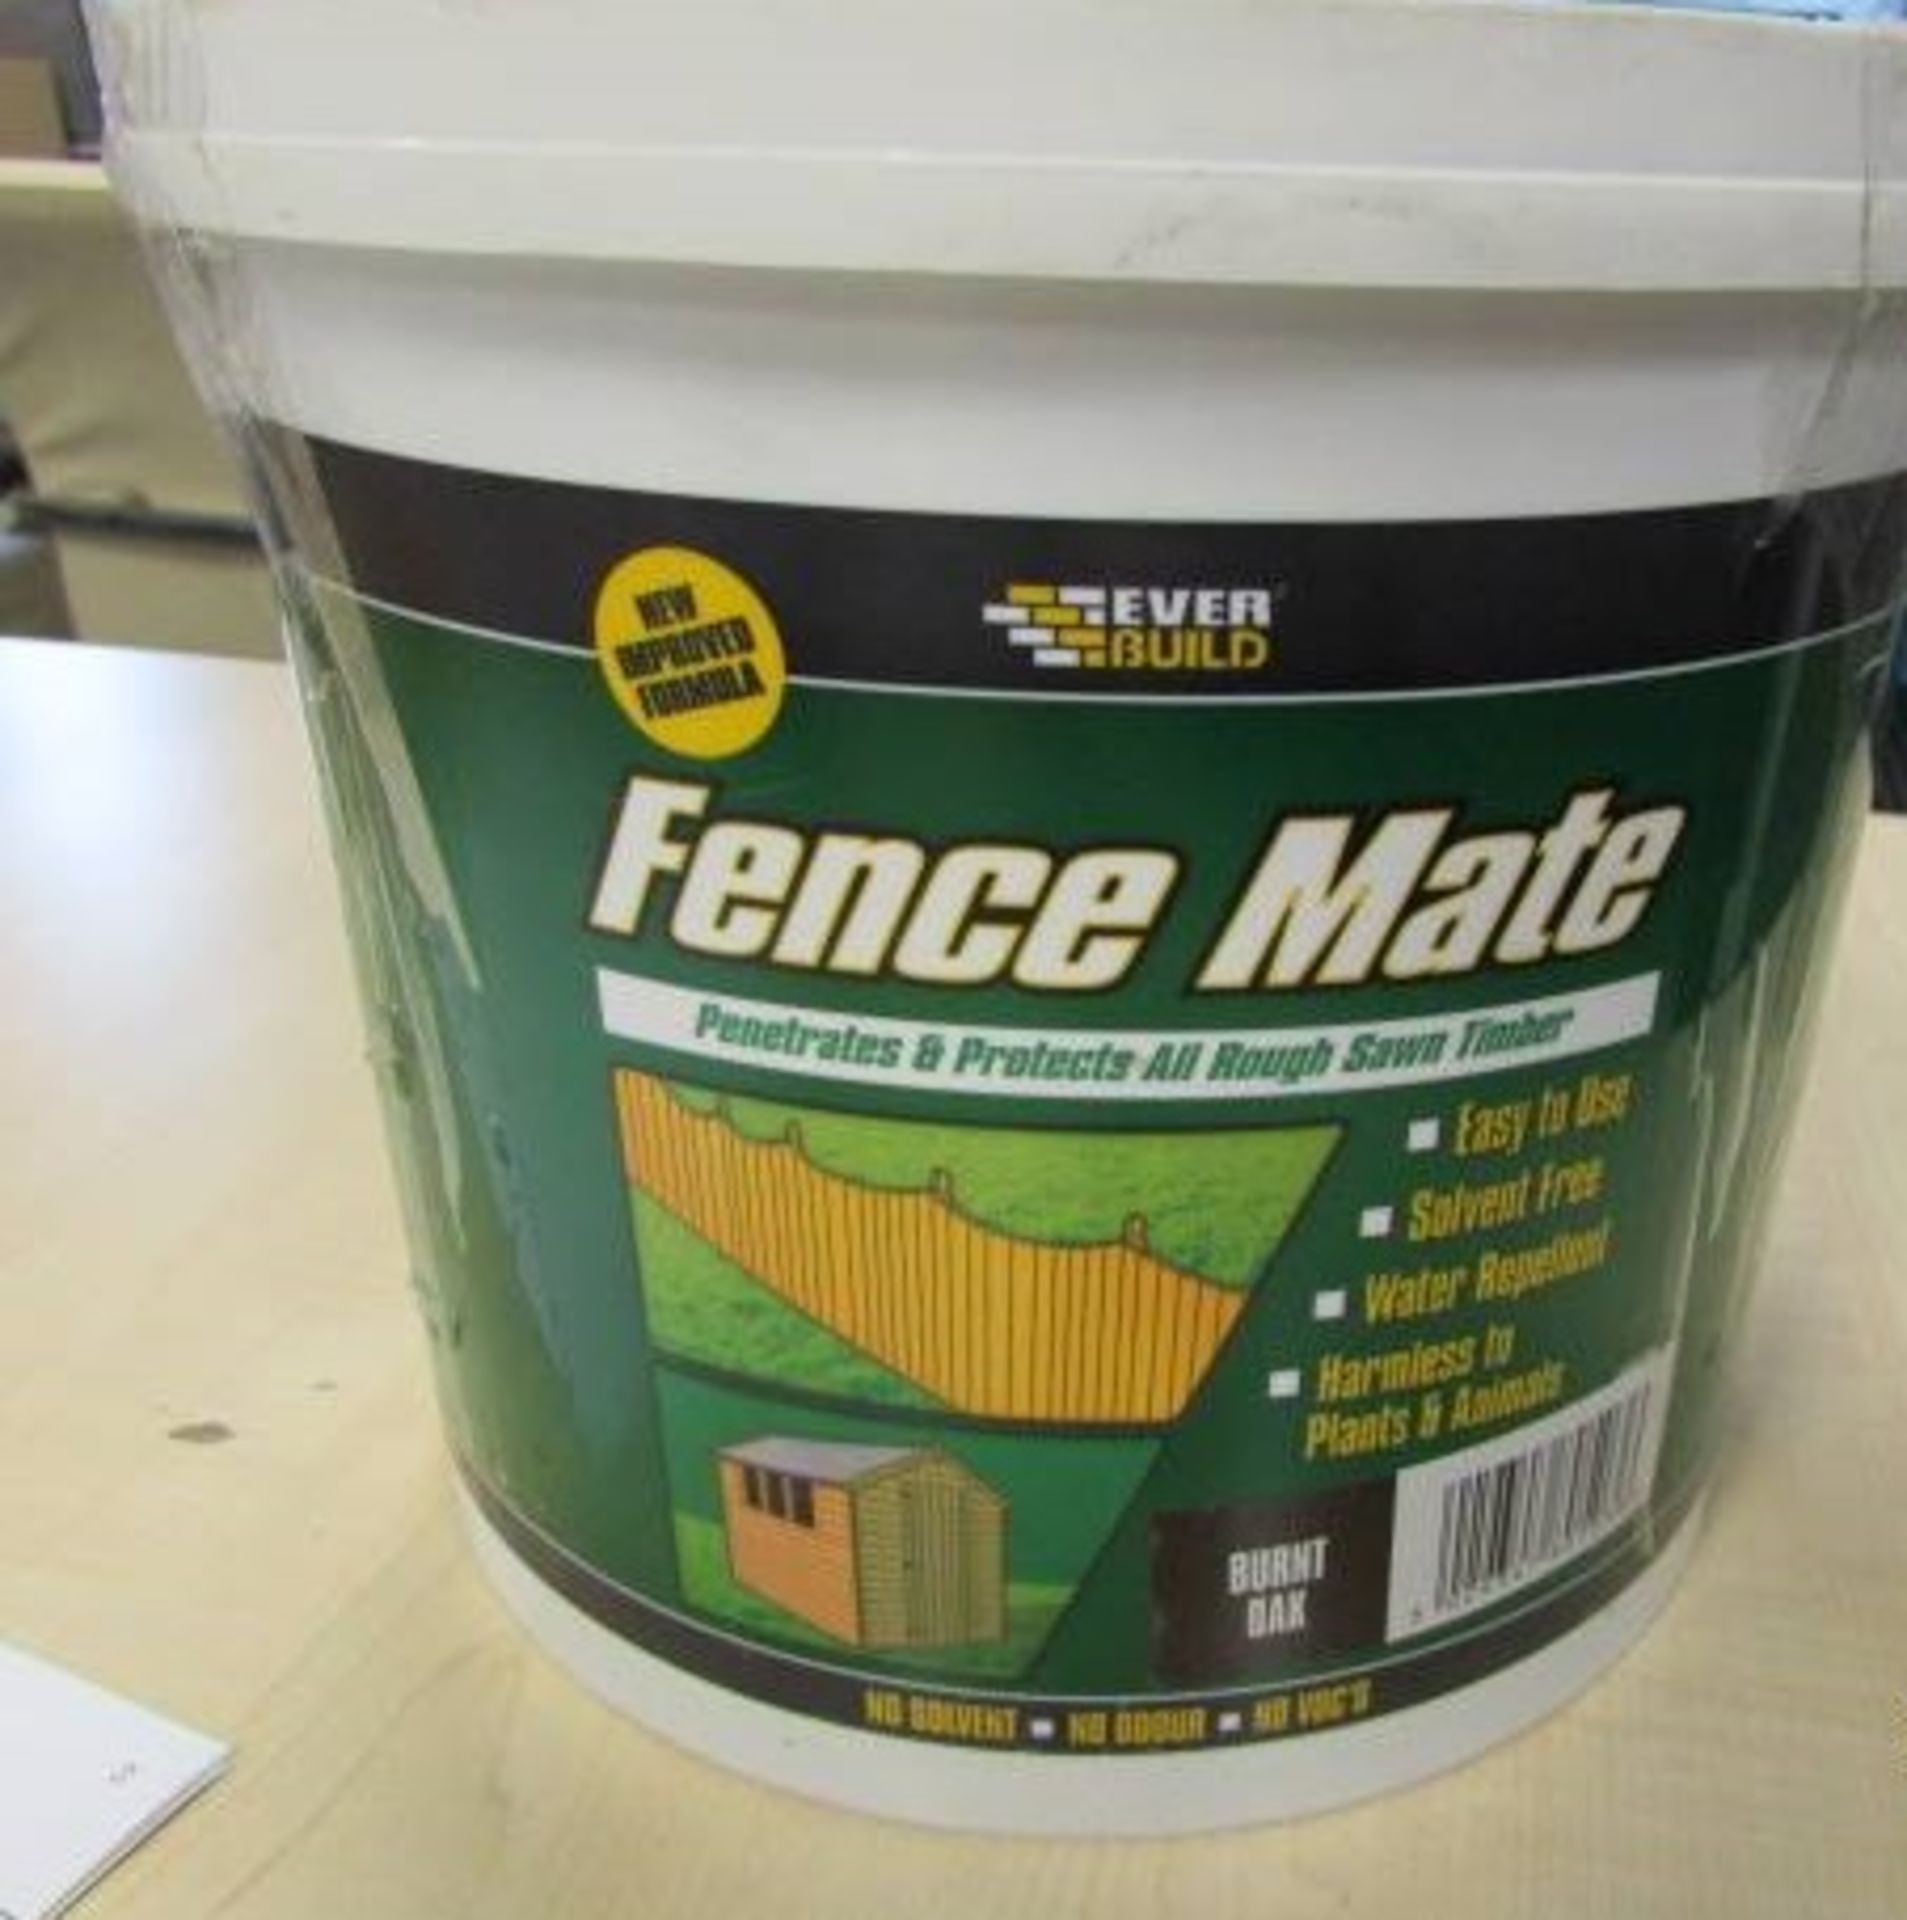 20 x Shed & Fence Mate (Mixed Colours, "Holly Green,Country Oak,Rustic Red,Burnt Oak" All 5L Tubs)